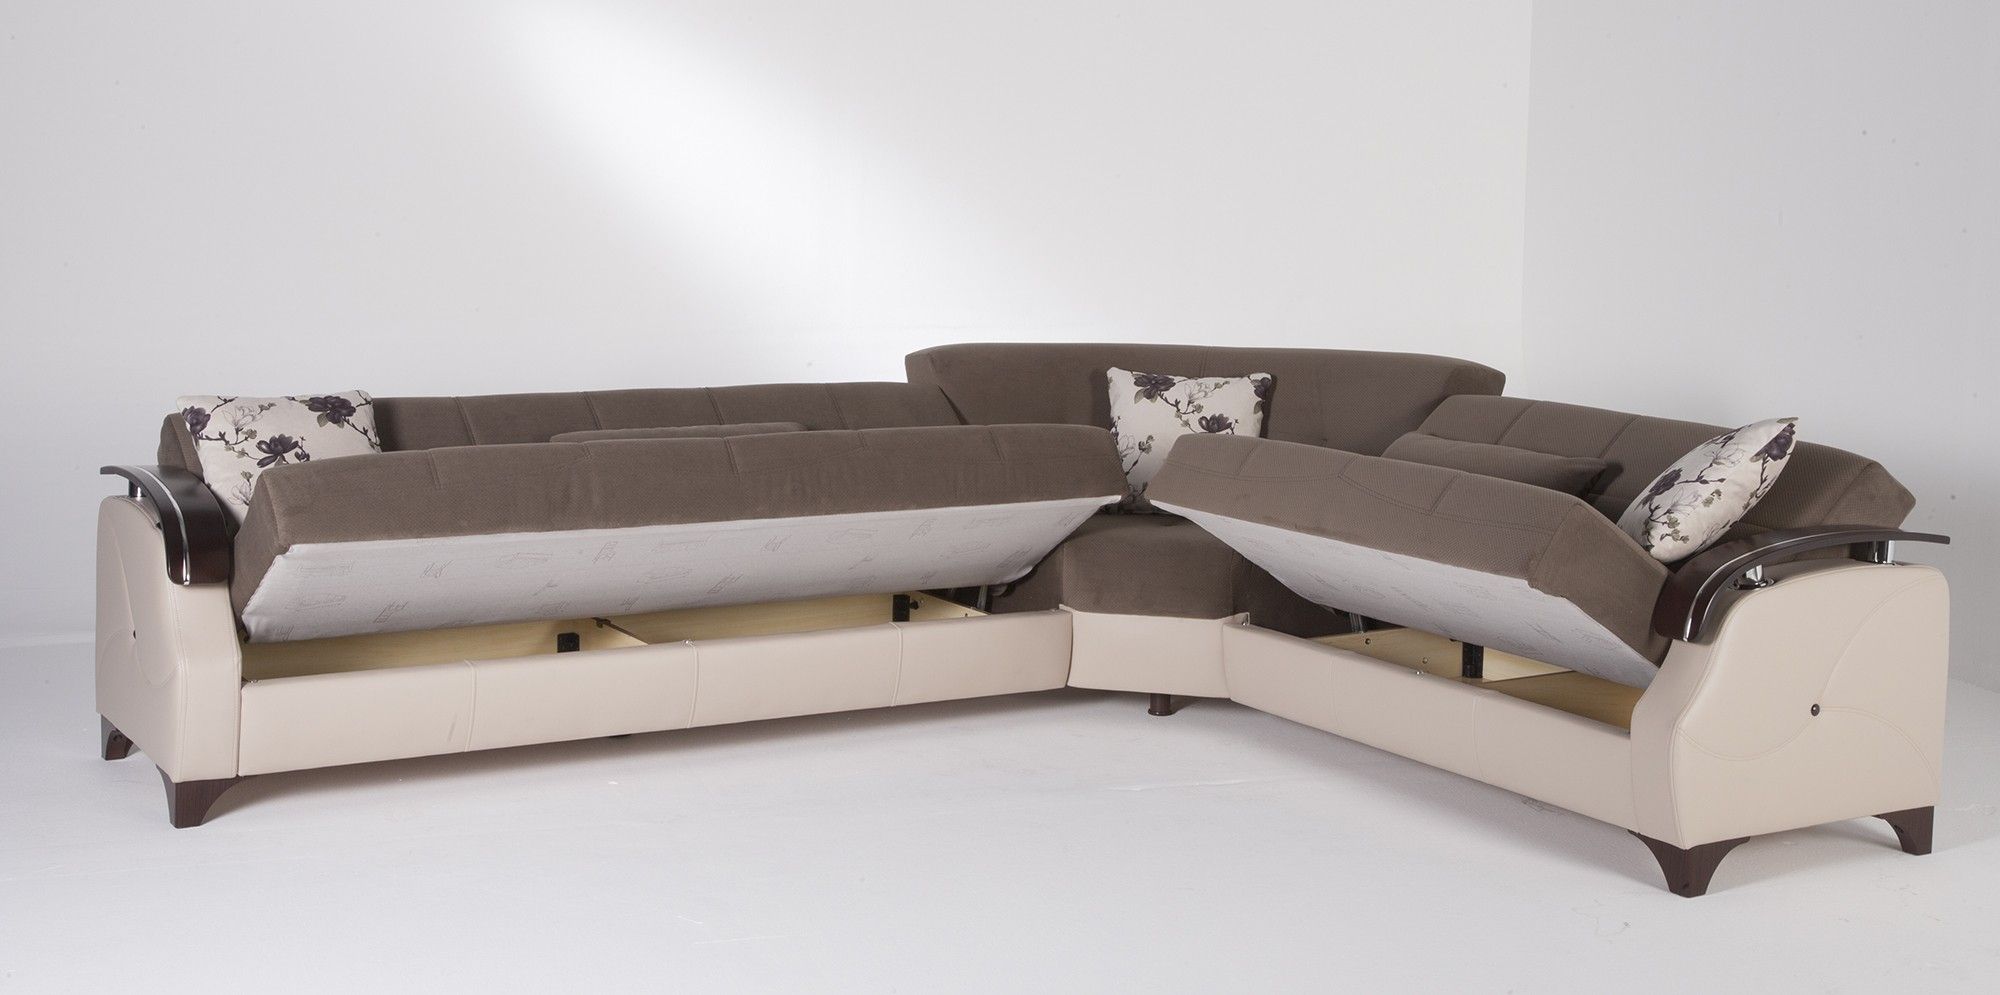 Charming Sectional Sofas Ct 42 For Your Eco Friendly Sectional Intended For Eco Friendly Sectional Sofa (Photo 10 of 12)